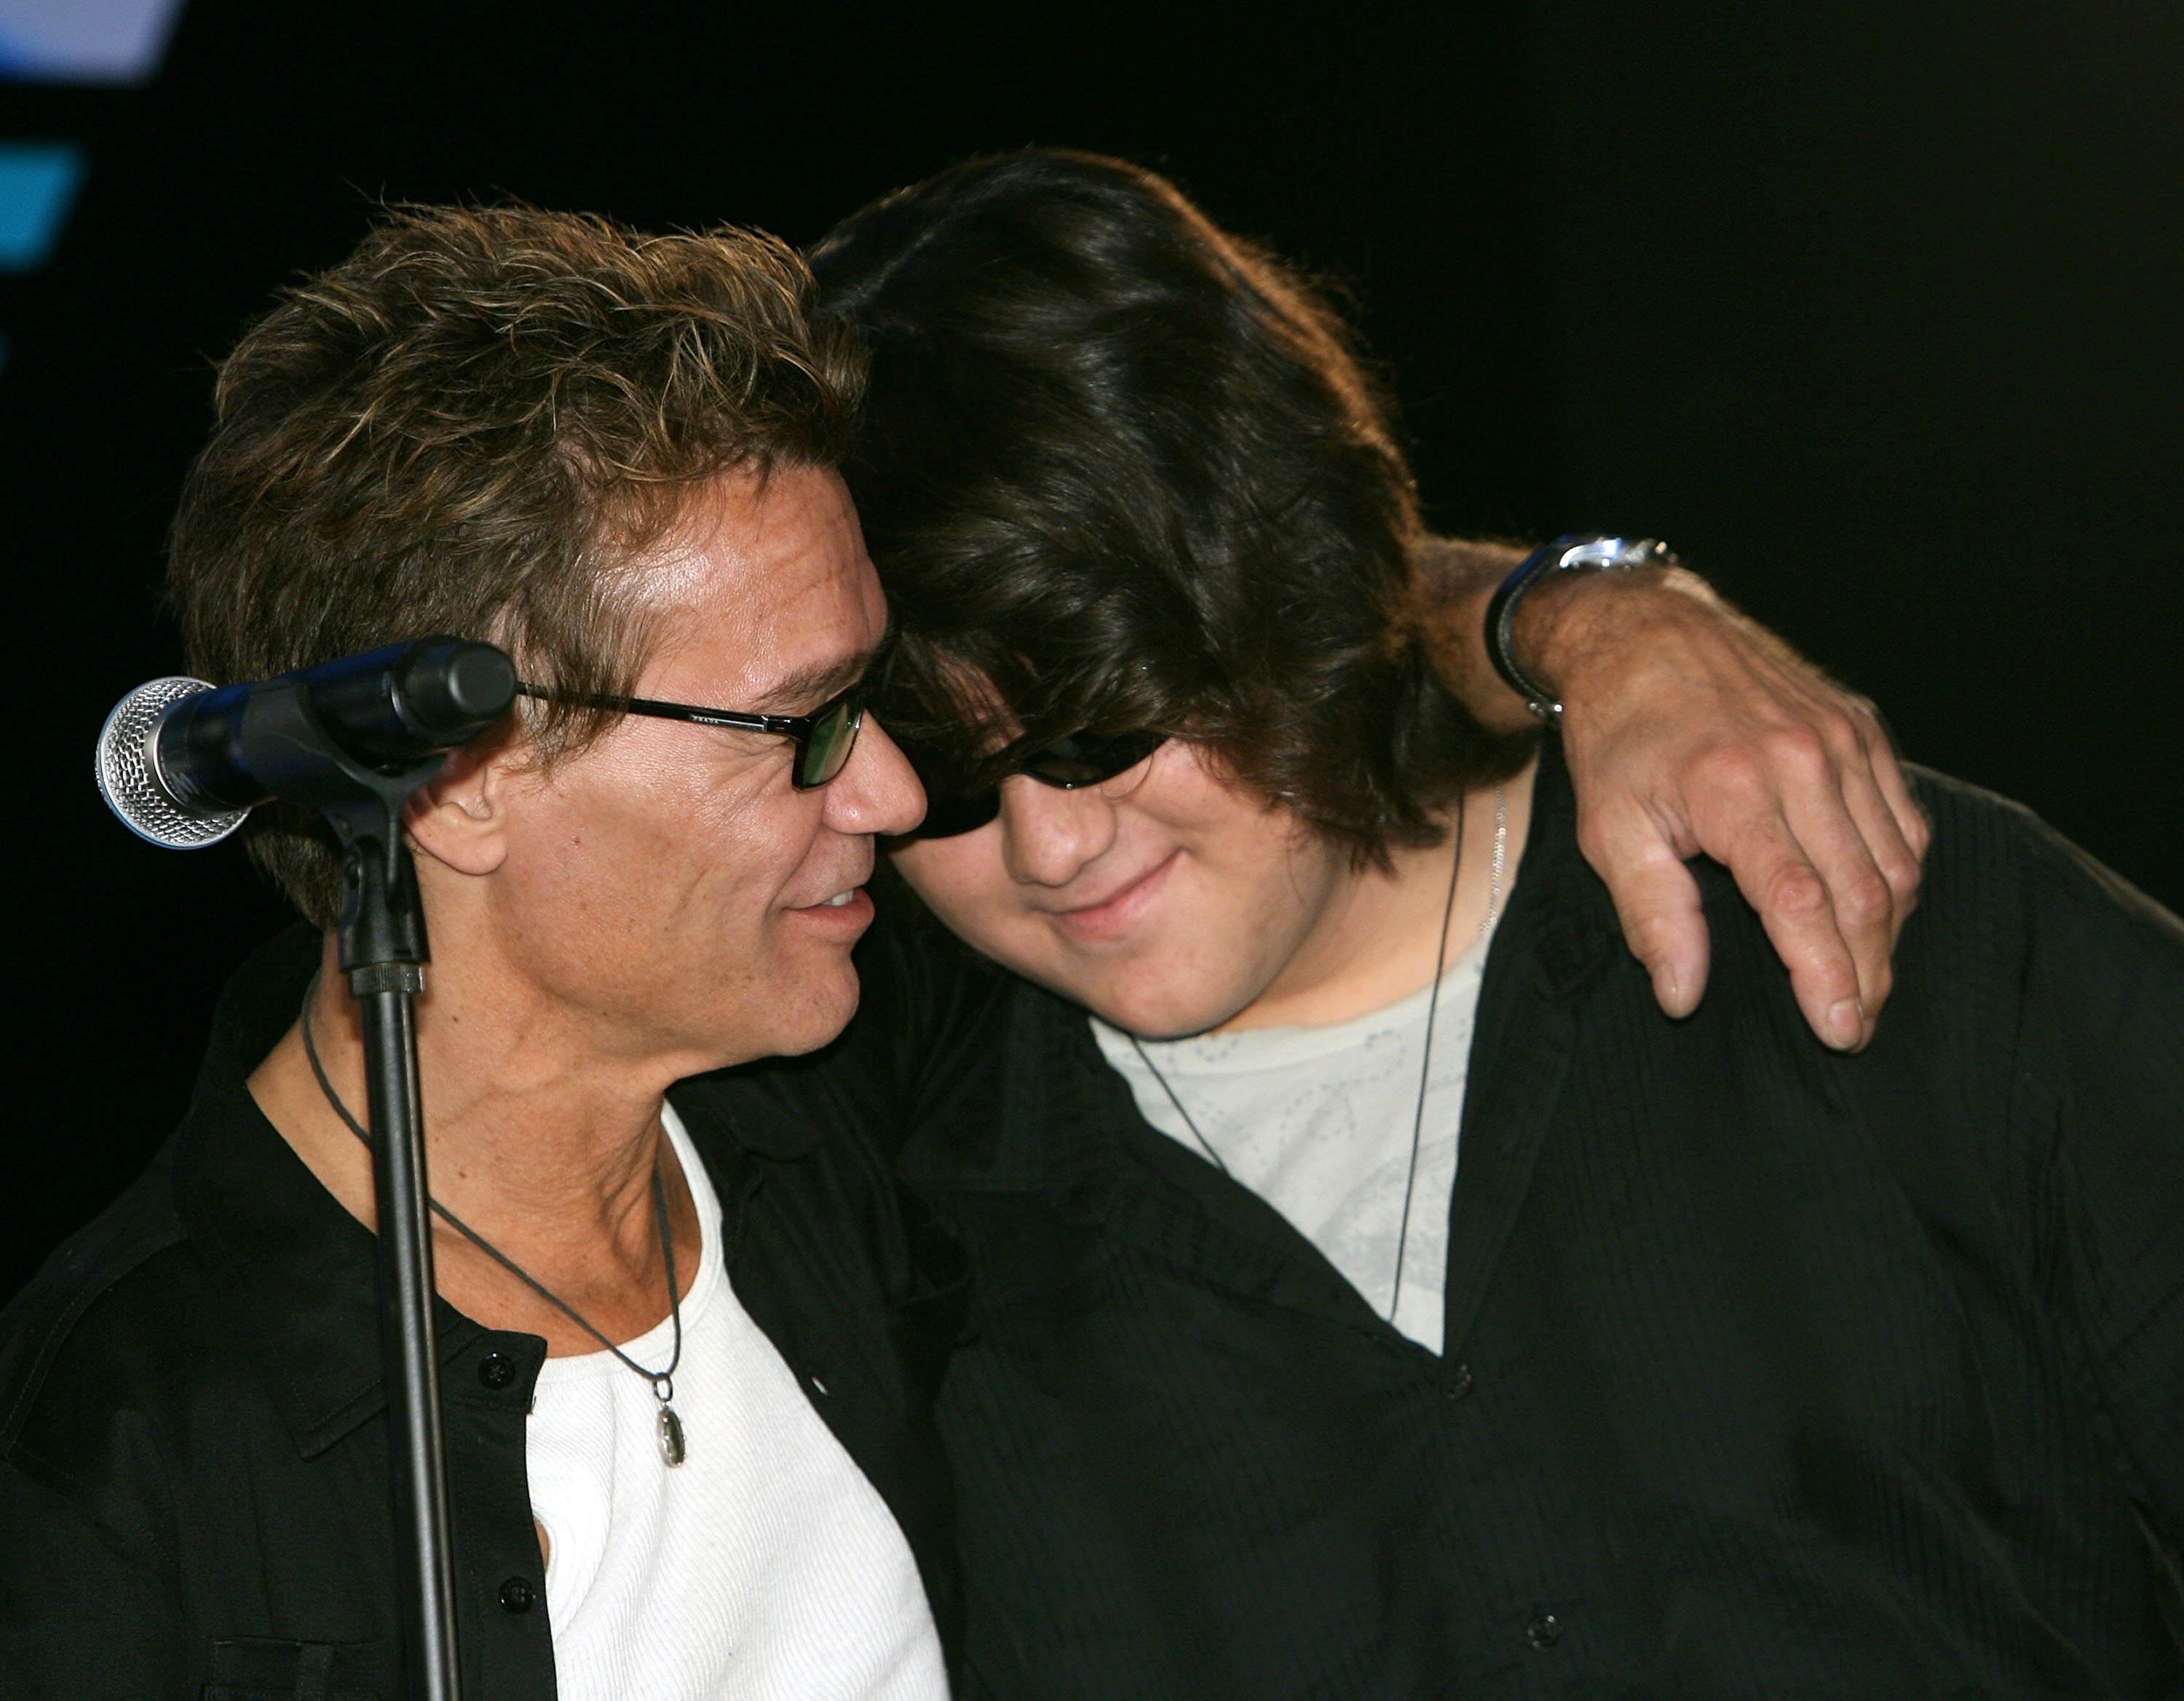 Eddie and Wolfgang Van Halen at the Van Halen press conference announcing their new tour on August 13, 2007, in Los Angeles, California | Source: Getty Images